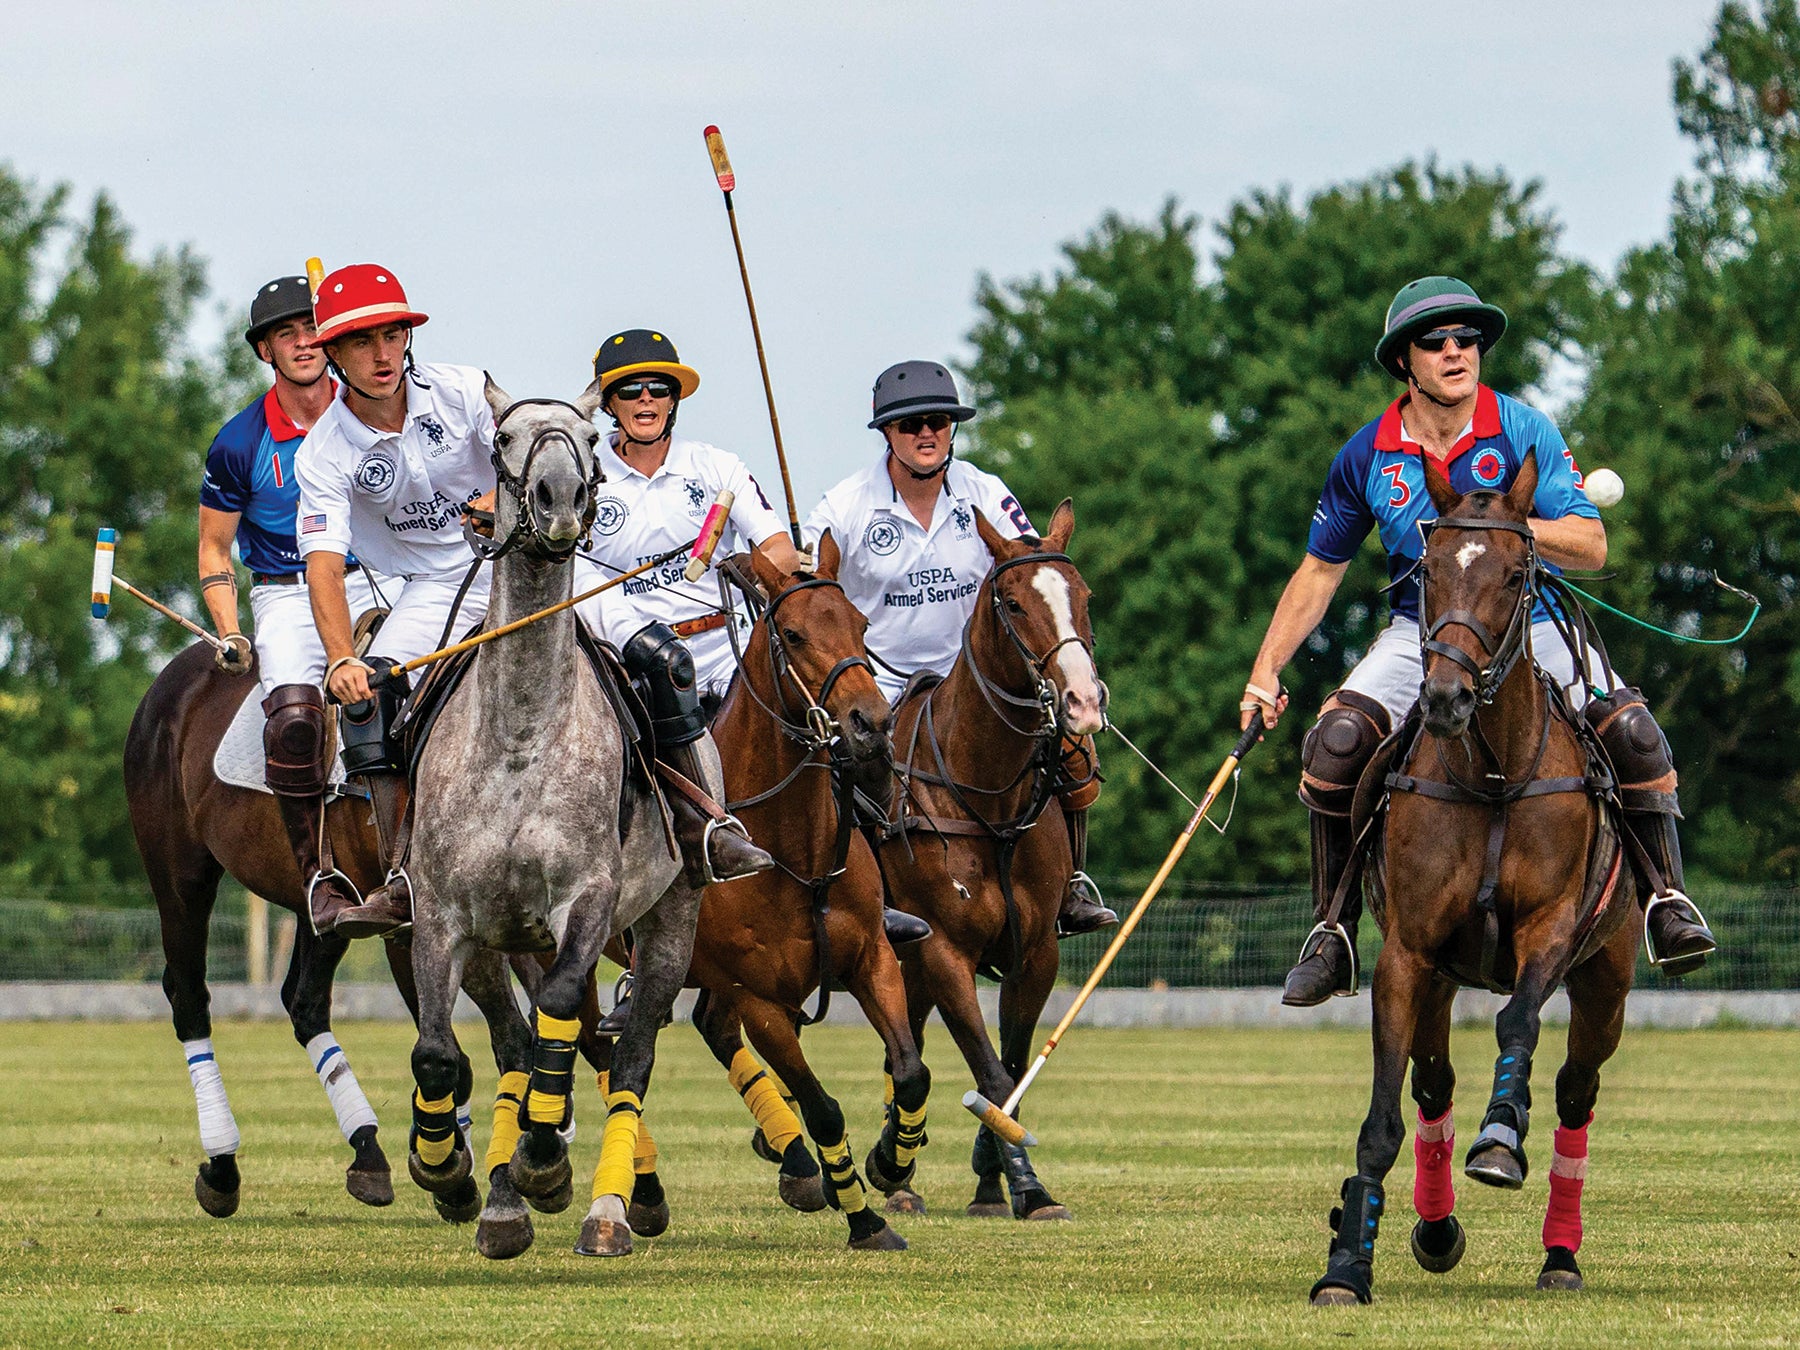 U.S. Army polo players, in white jerseys, take on a British team during a match in England. (Credit: Michael Berkeley Photography)